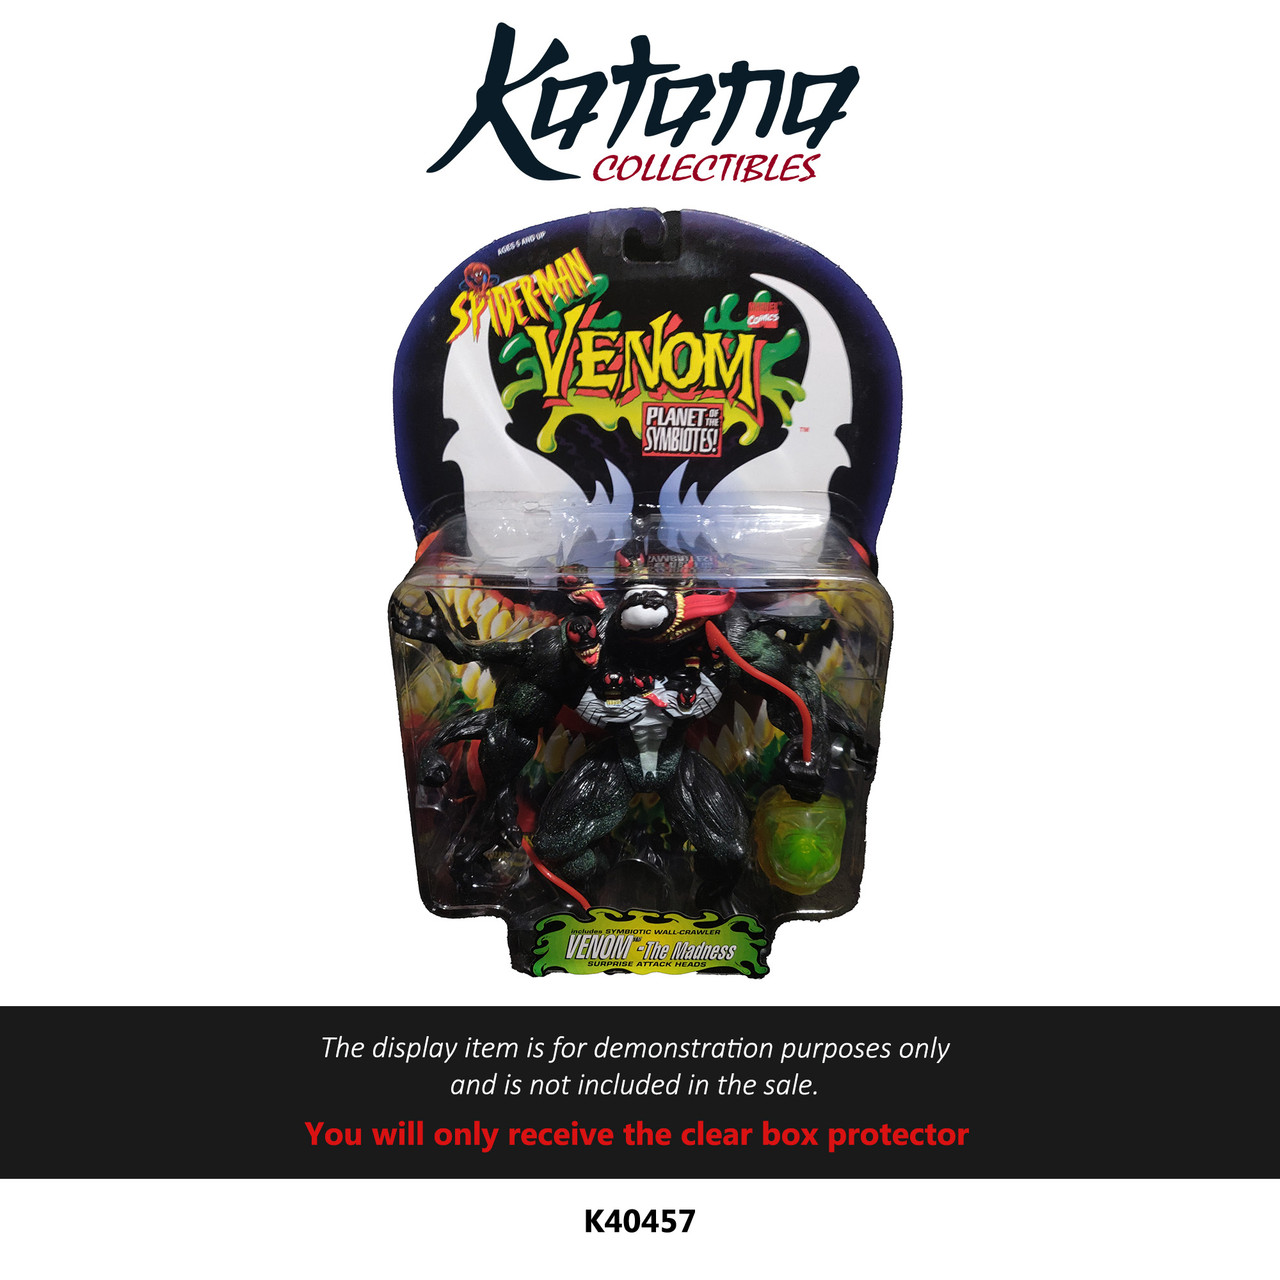 Katana Collectibles Protector For Toybiz 1996 Planet Of The Symbiotes: Venom-The Madness